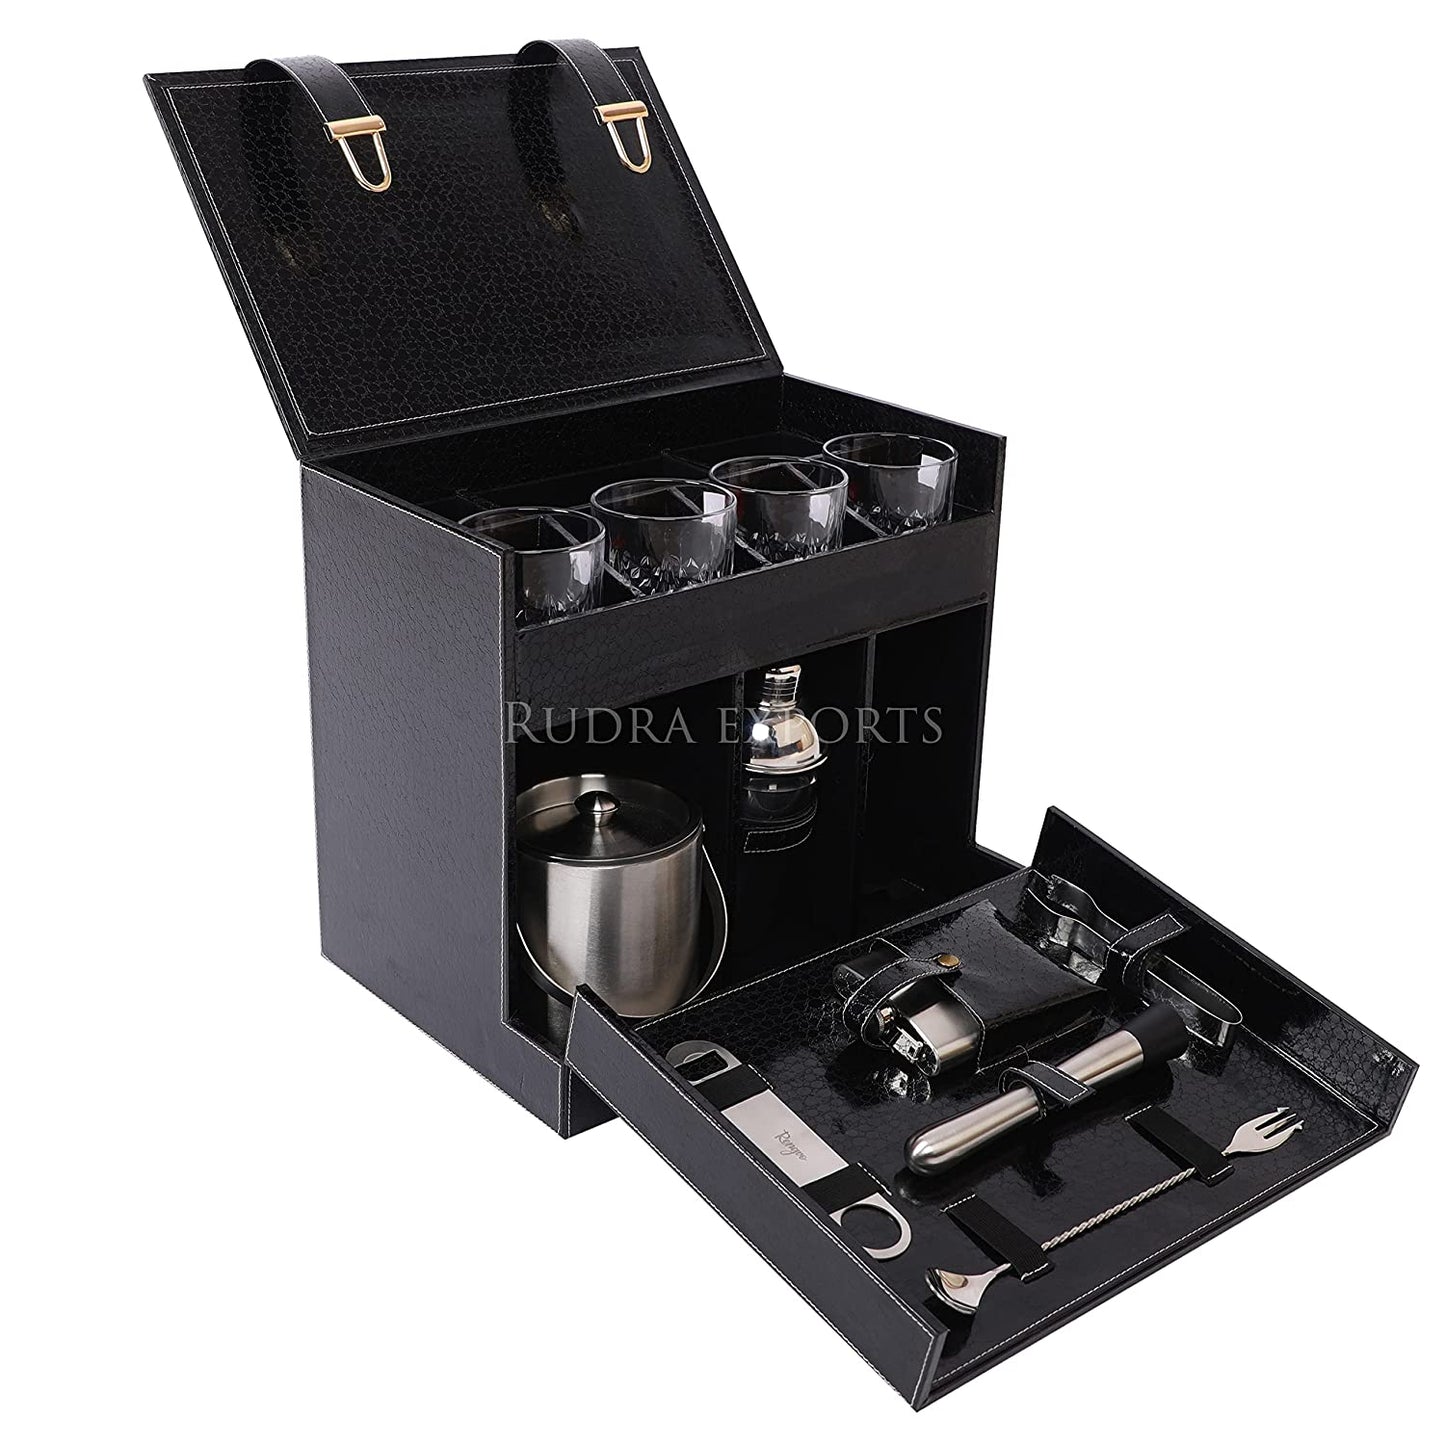 Rudra Exports Table Top Vegan Leather Portable Bar Box with Accessories Set & 4 Whisky Glasses | Min Bar for Home (Black)